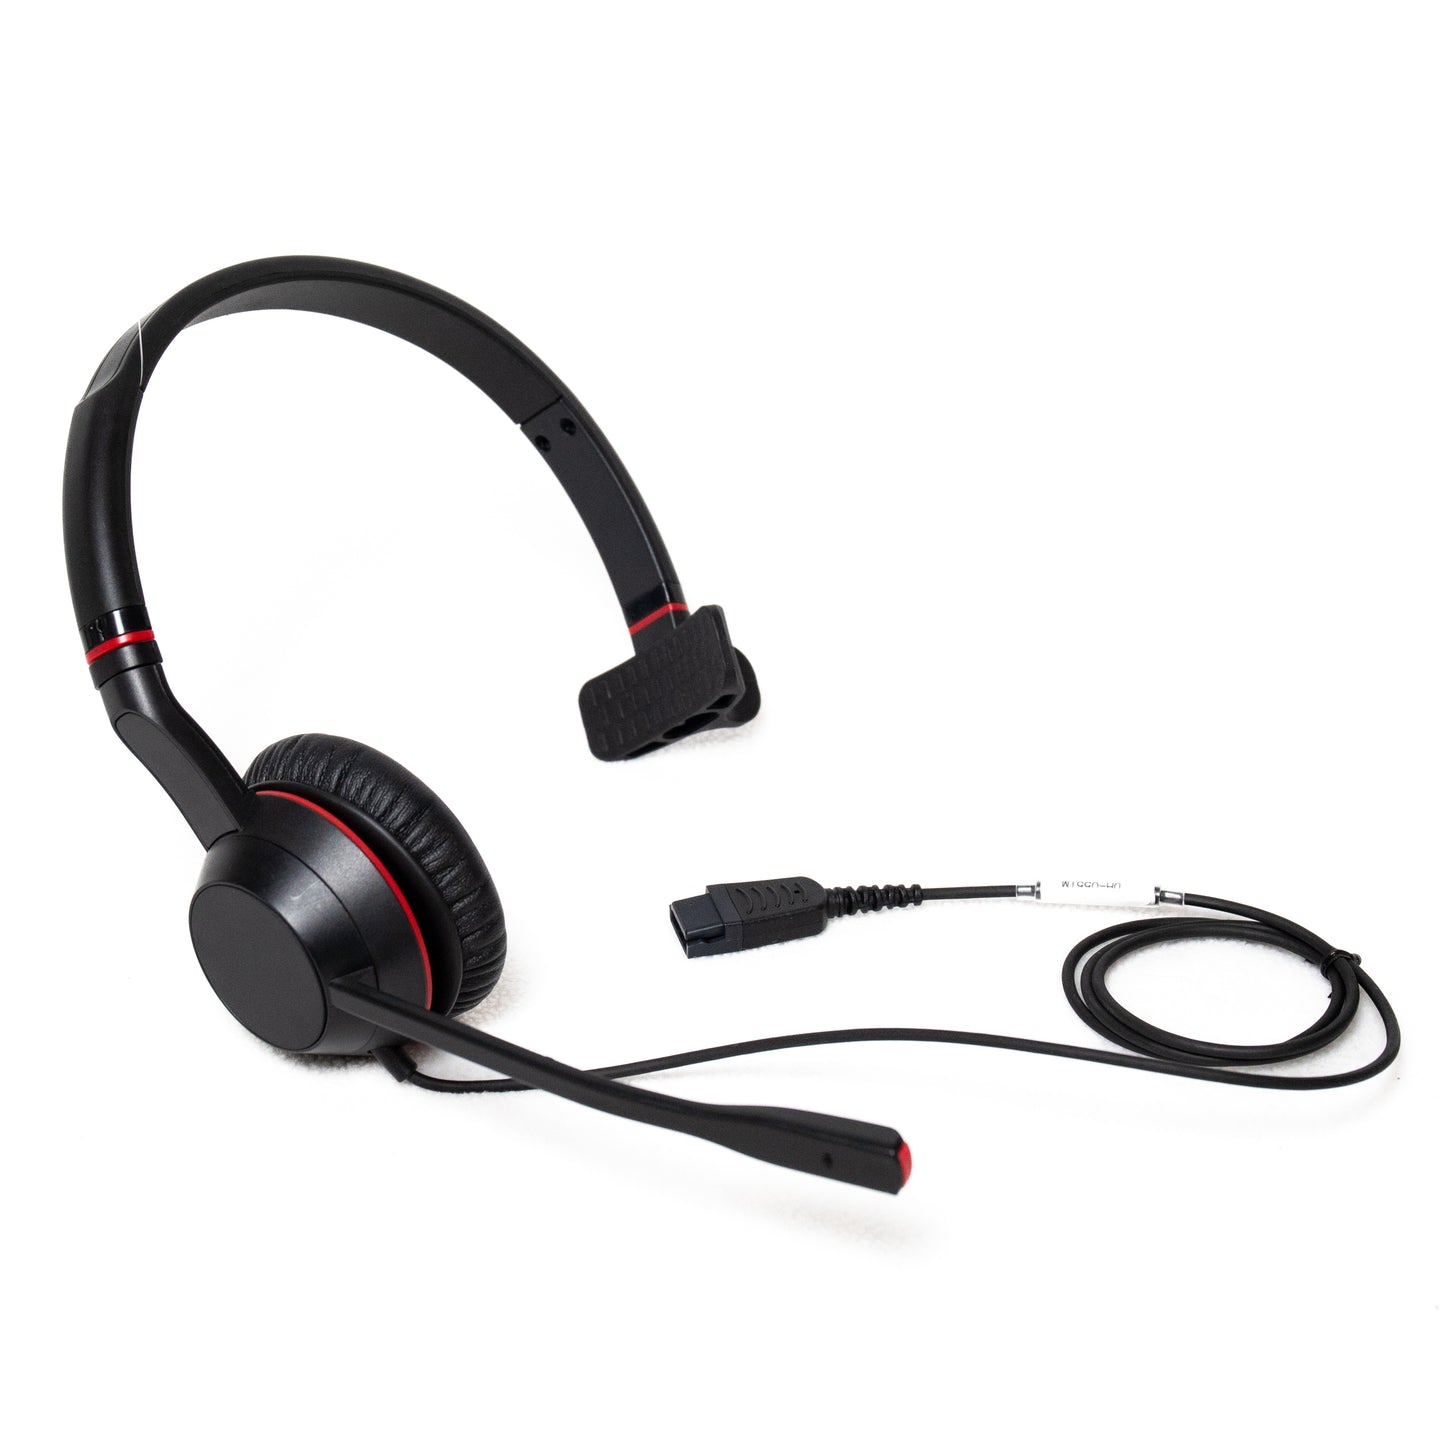 Starkey S700-NC Headset with Passive Noise Canceling Mic